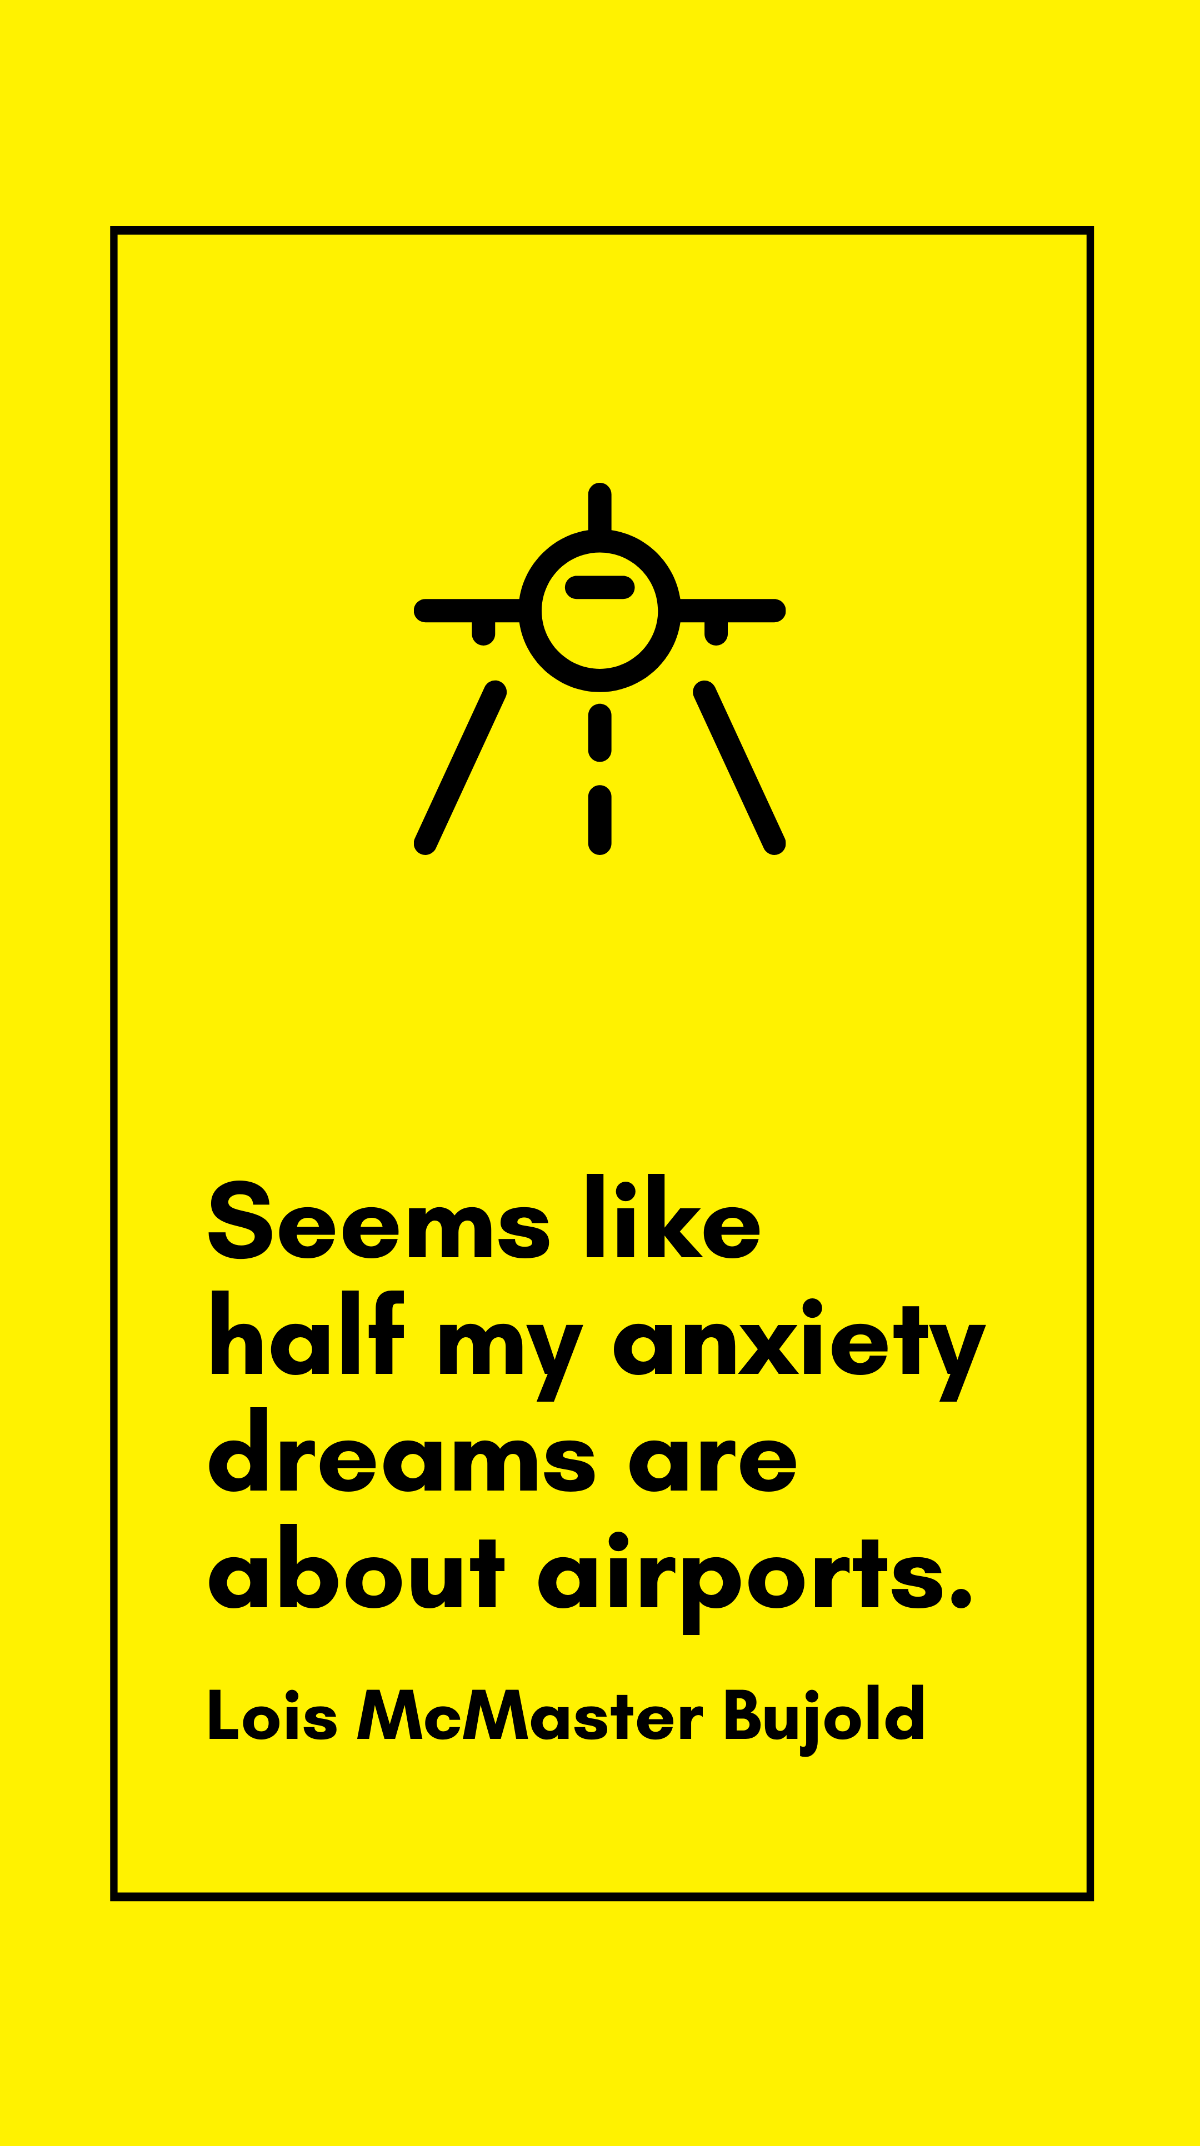 Lois McMaster Bujold - Seems like half my anxiety dreams are about airports. Template